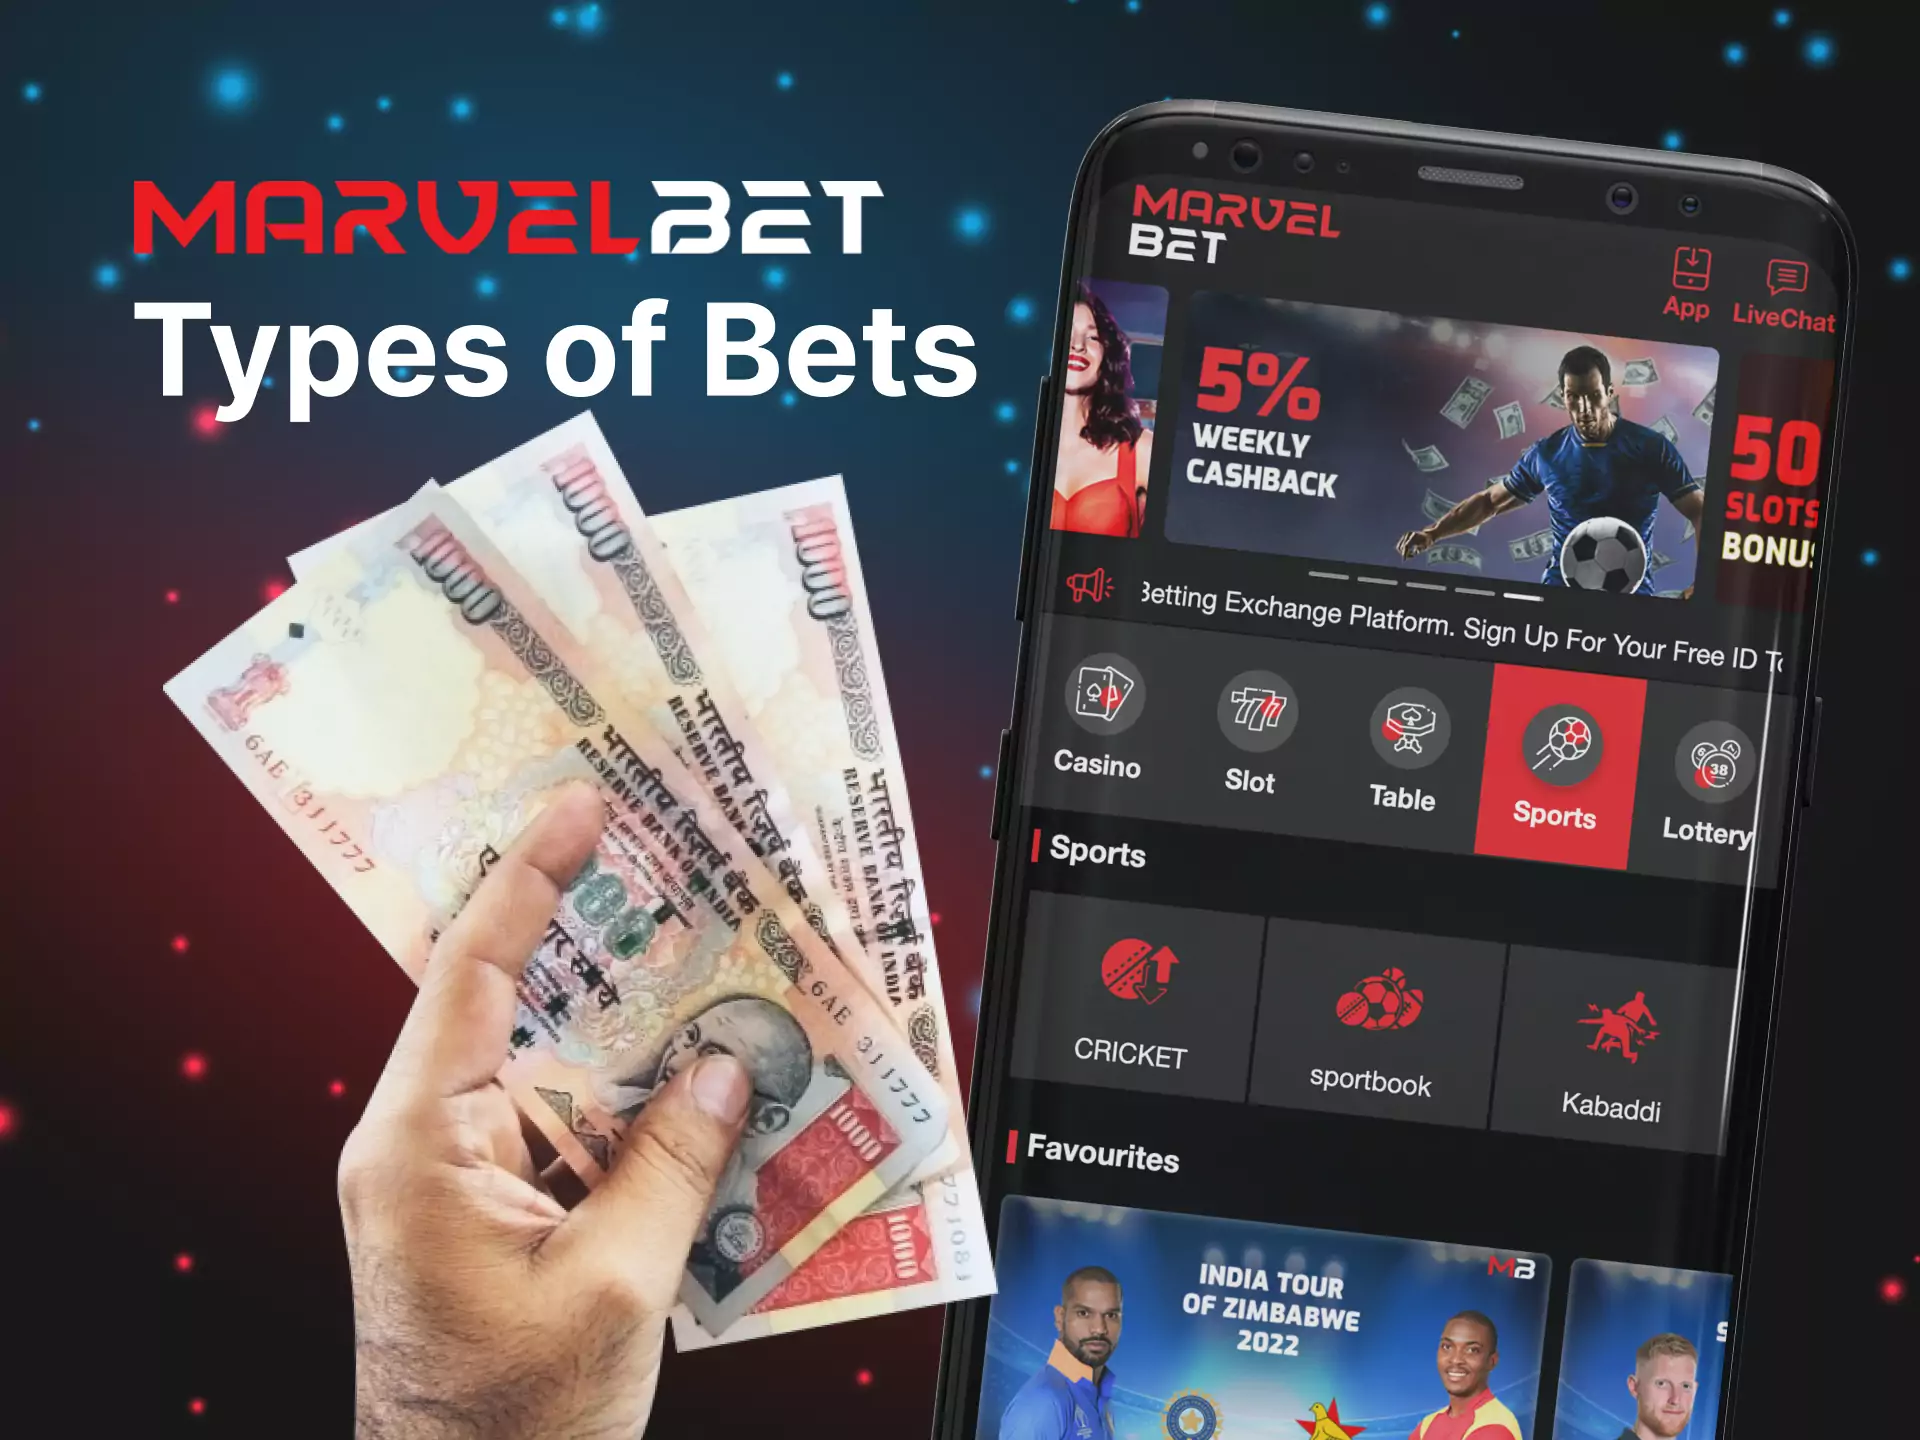 You can combine different types of bets in the Marvelbet app.